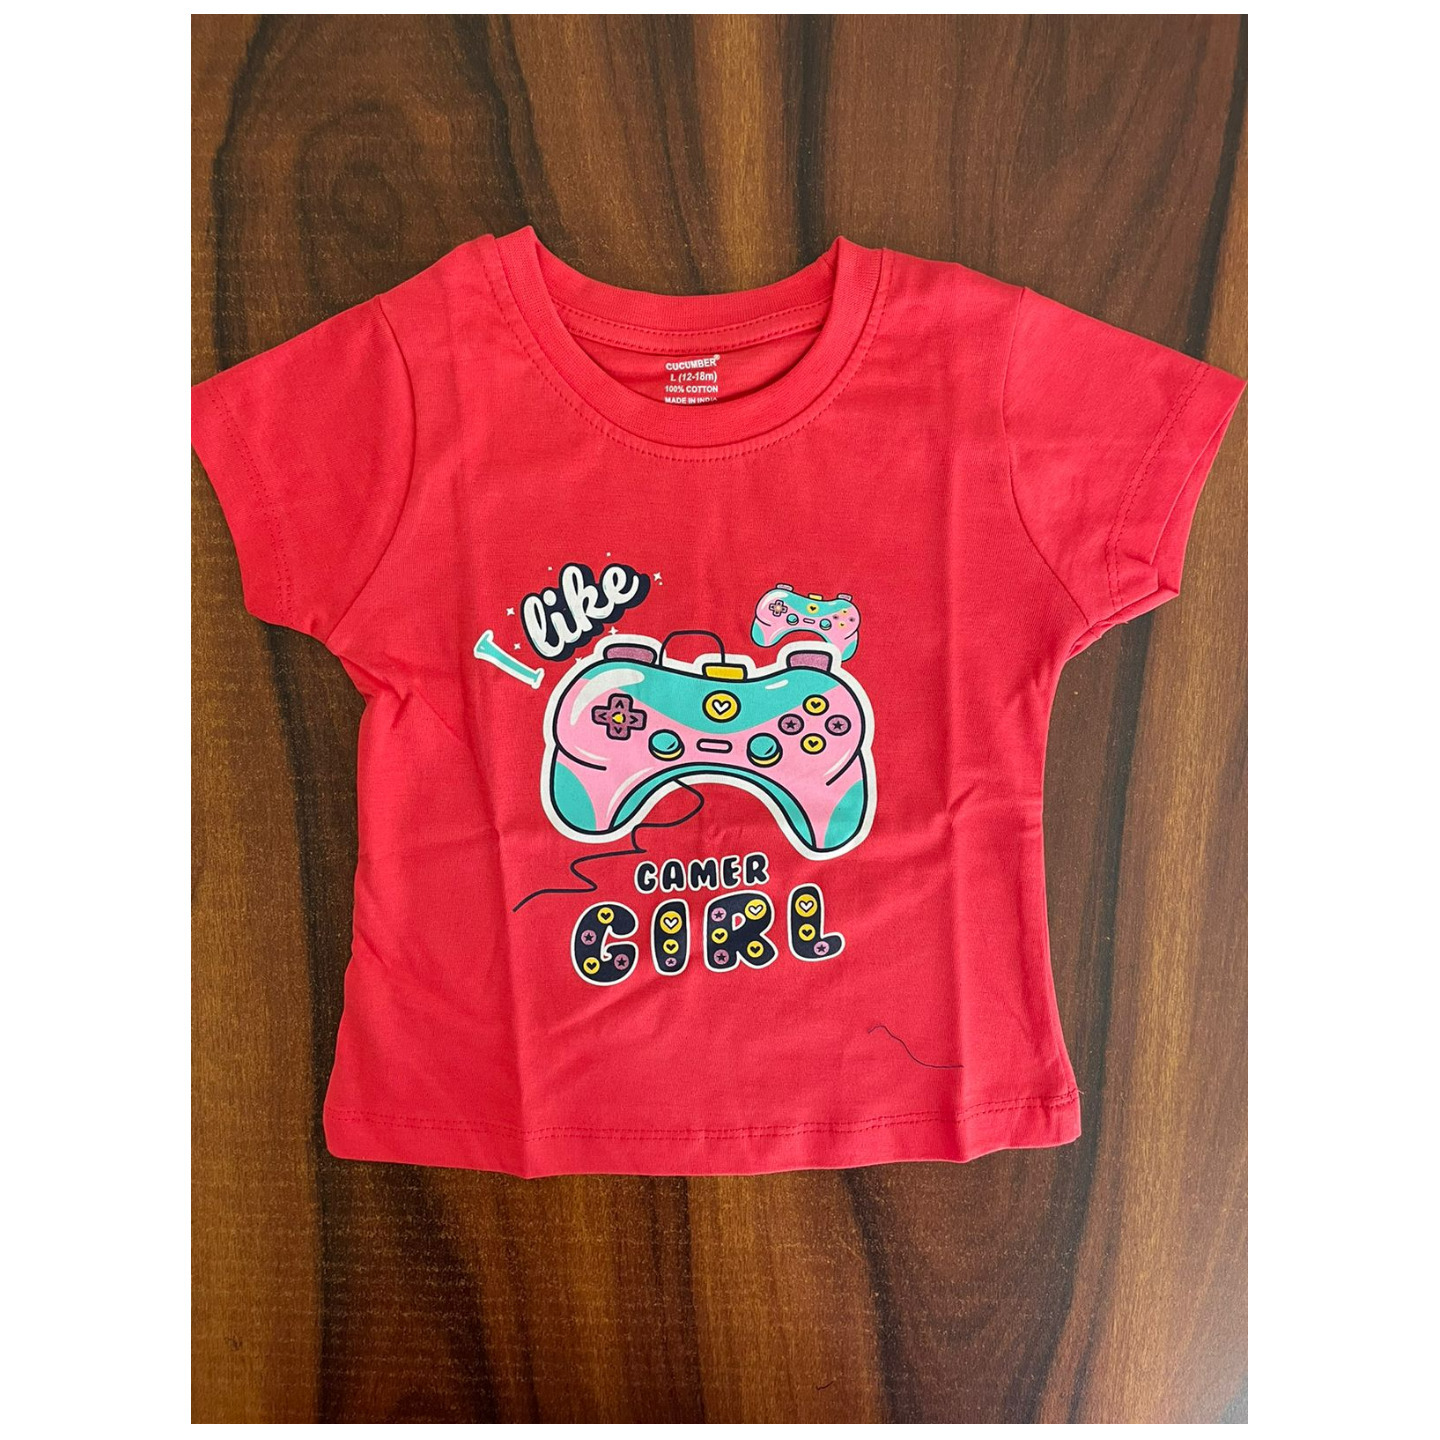 Girls Round Neck Tops Just Rs 195